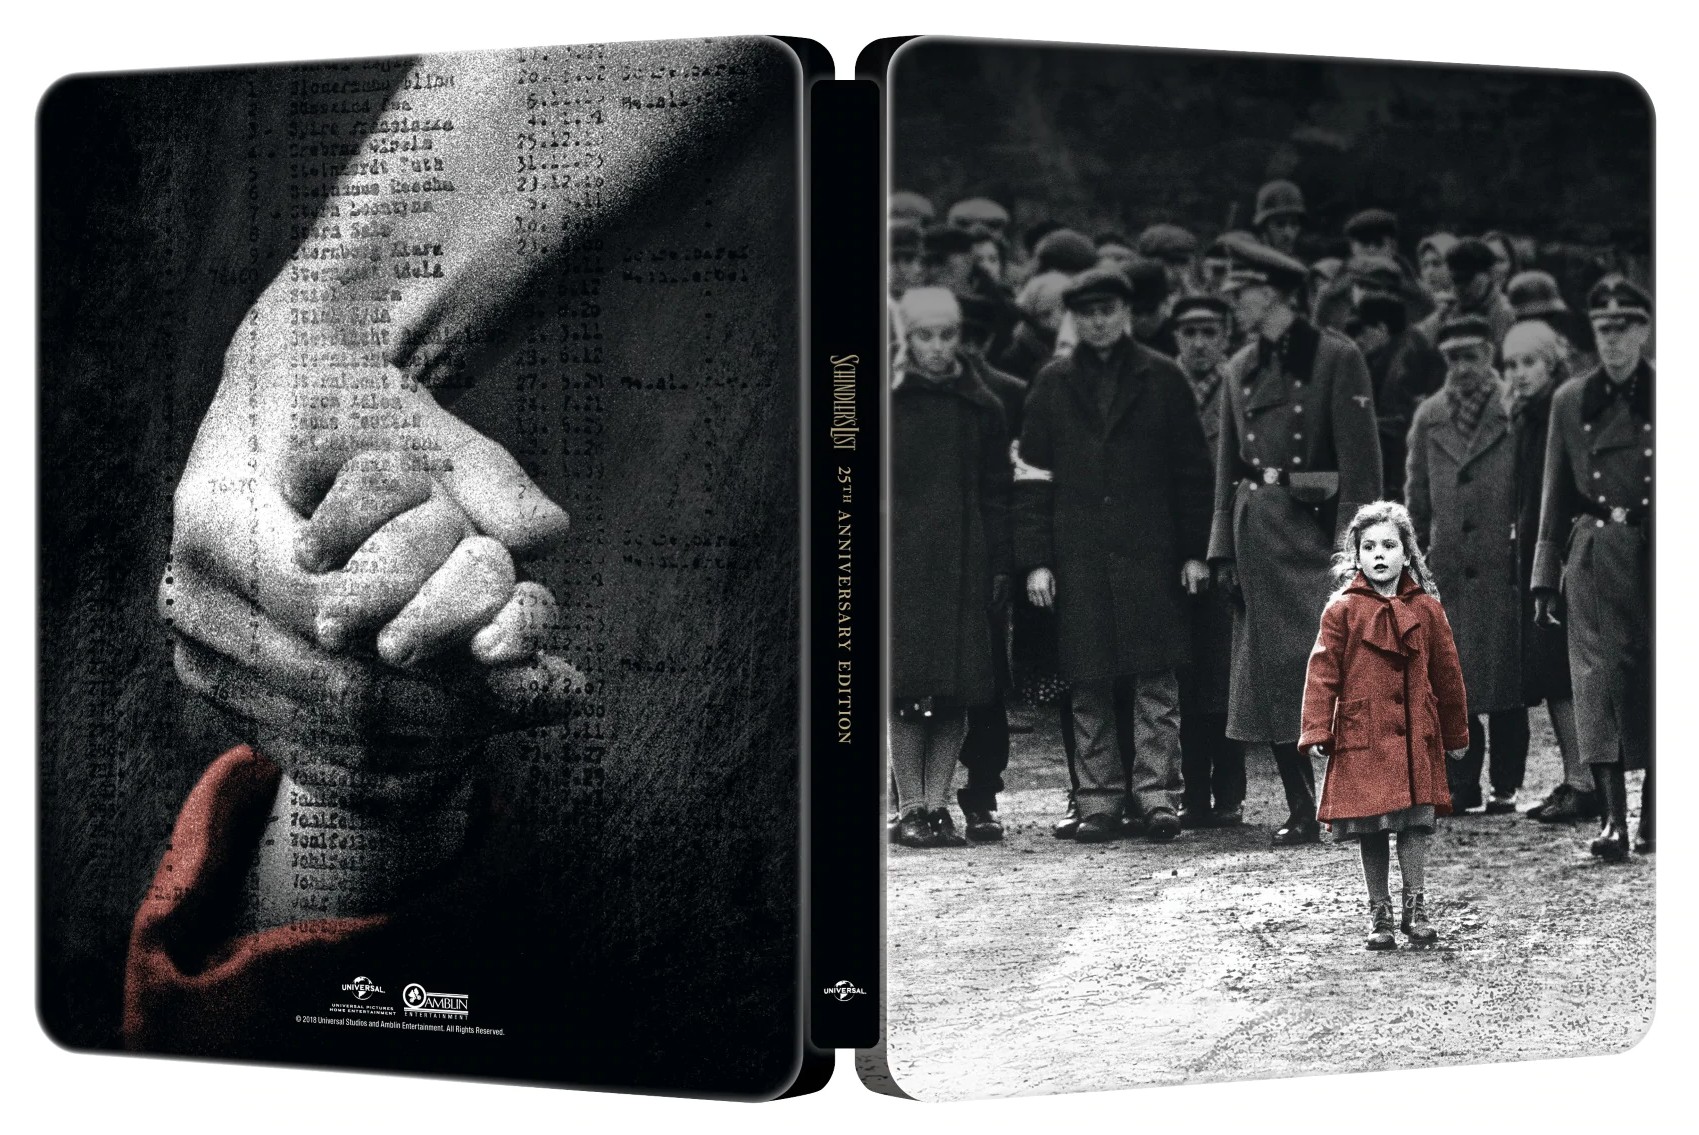 Schindlers list_front and back.jpg